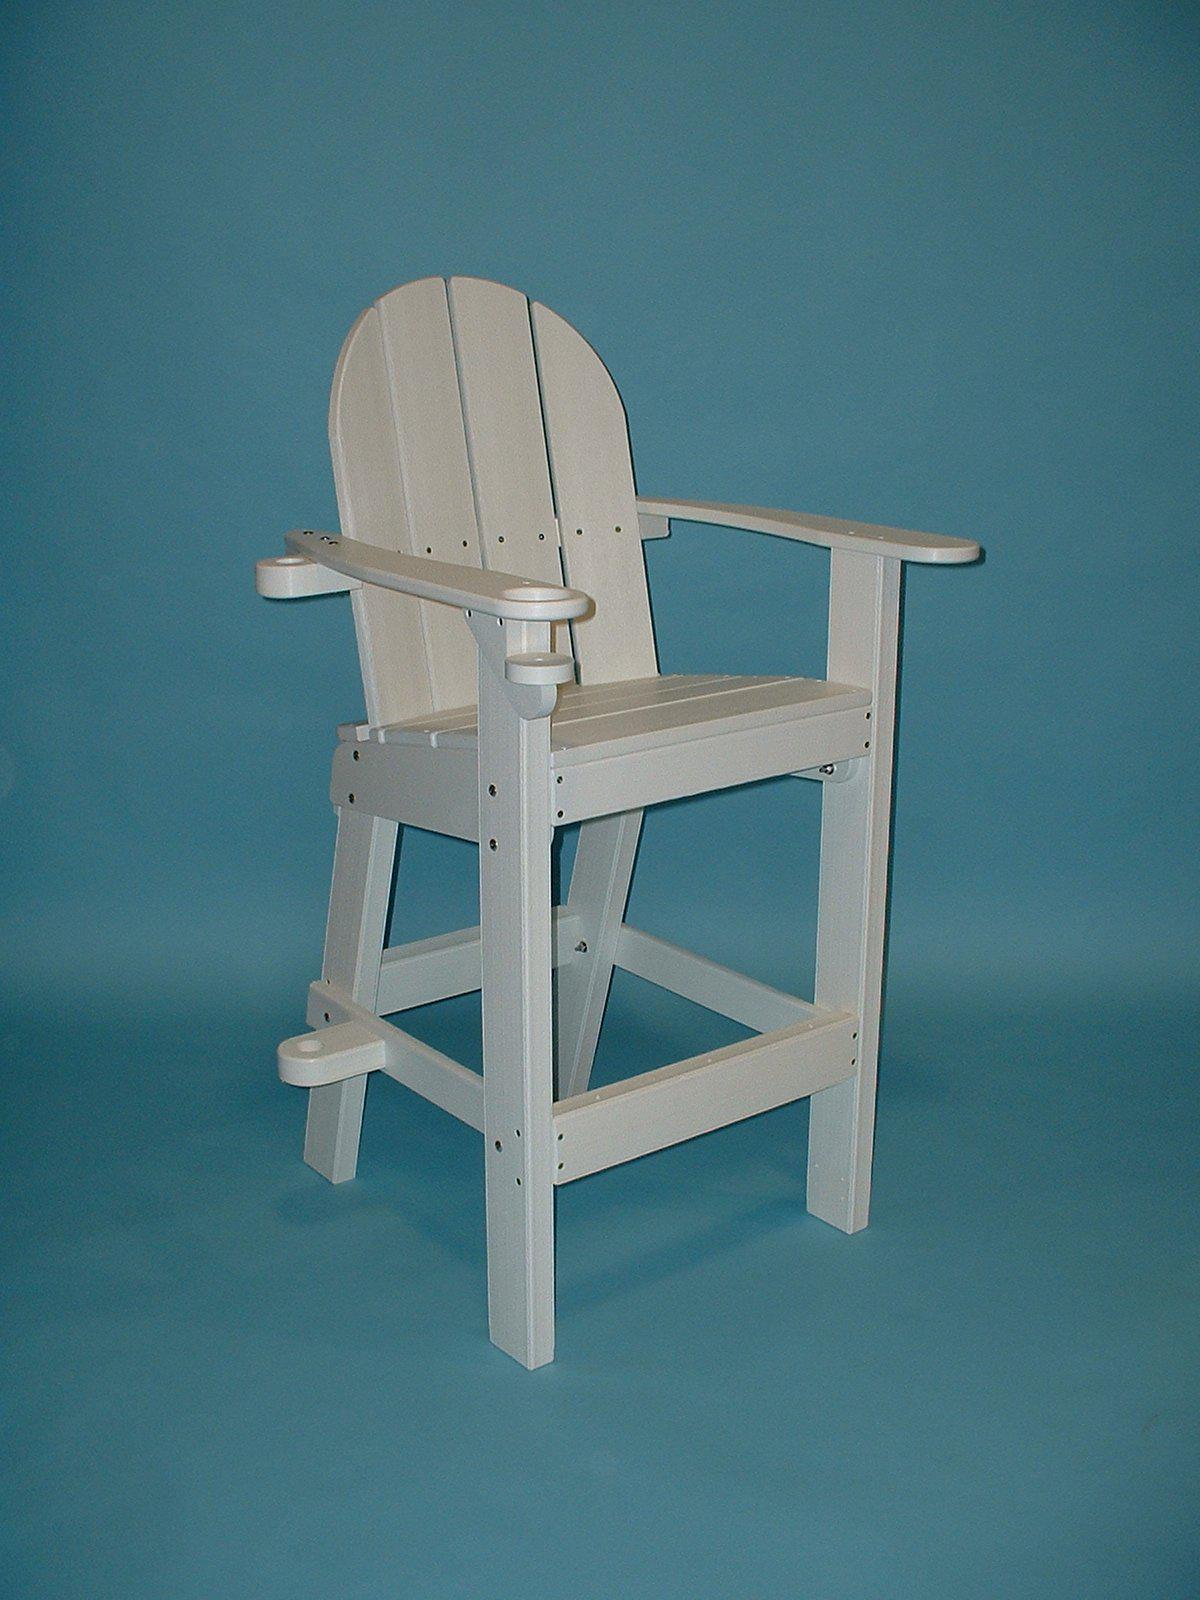 Tailwind Furniture Recycled Plastic Small Lifeguard Chair - LG-500 - Seat Height: 30" - LEAD TIME TO SHIP 10 TO 12 BUSINESS DAYS